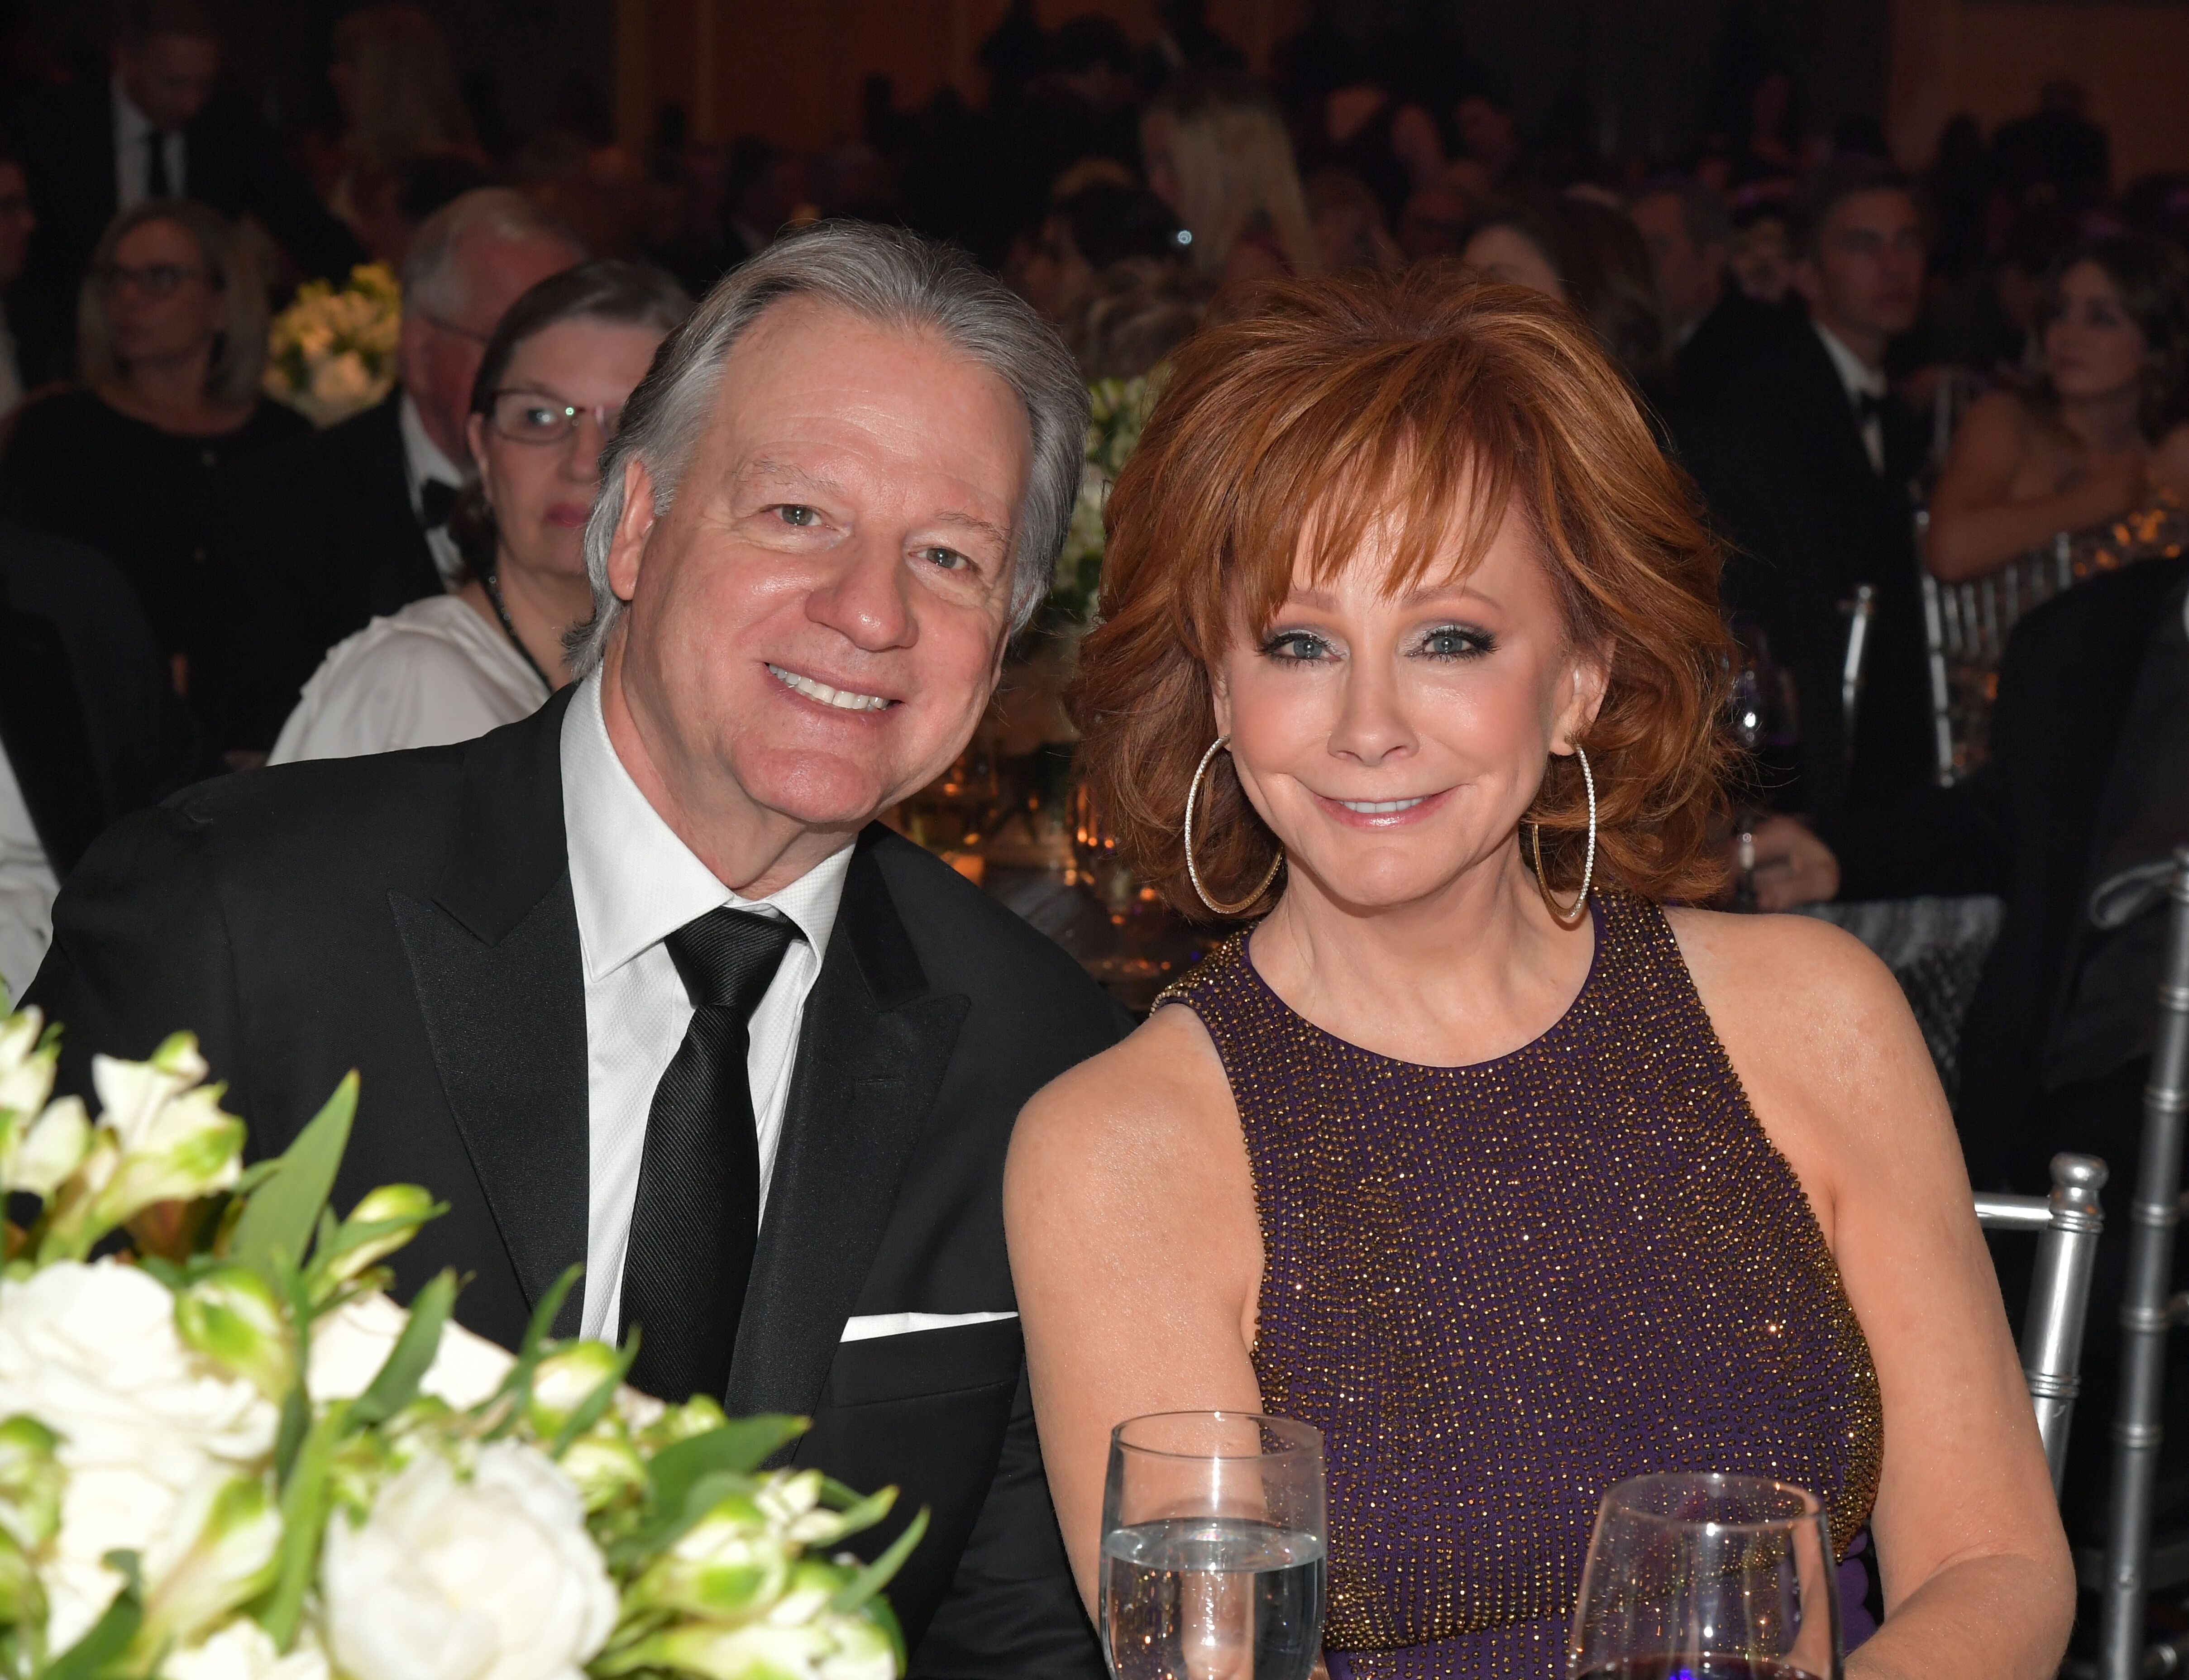 Skeeter Lasuzzo and host Reba McEntire attend Celebrity Fight Night XXV. | Source: Getty Images